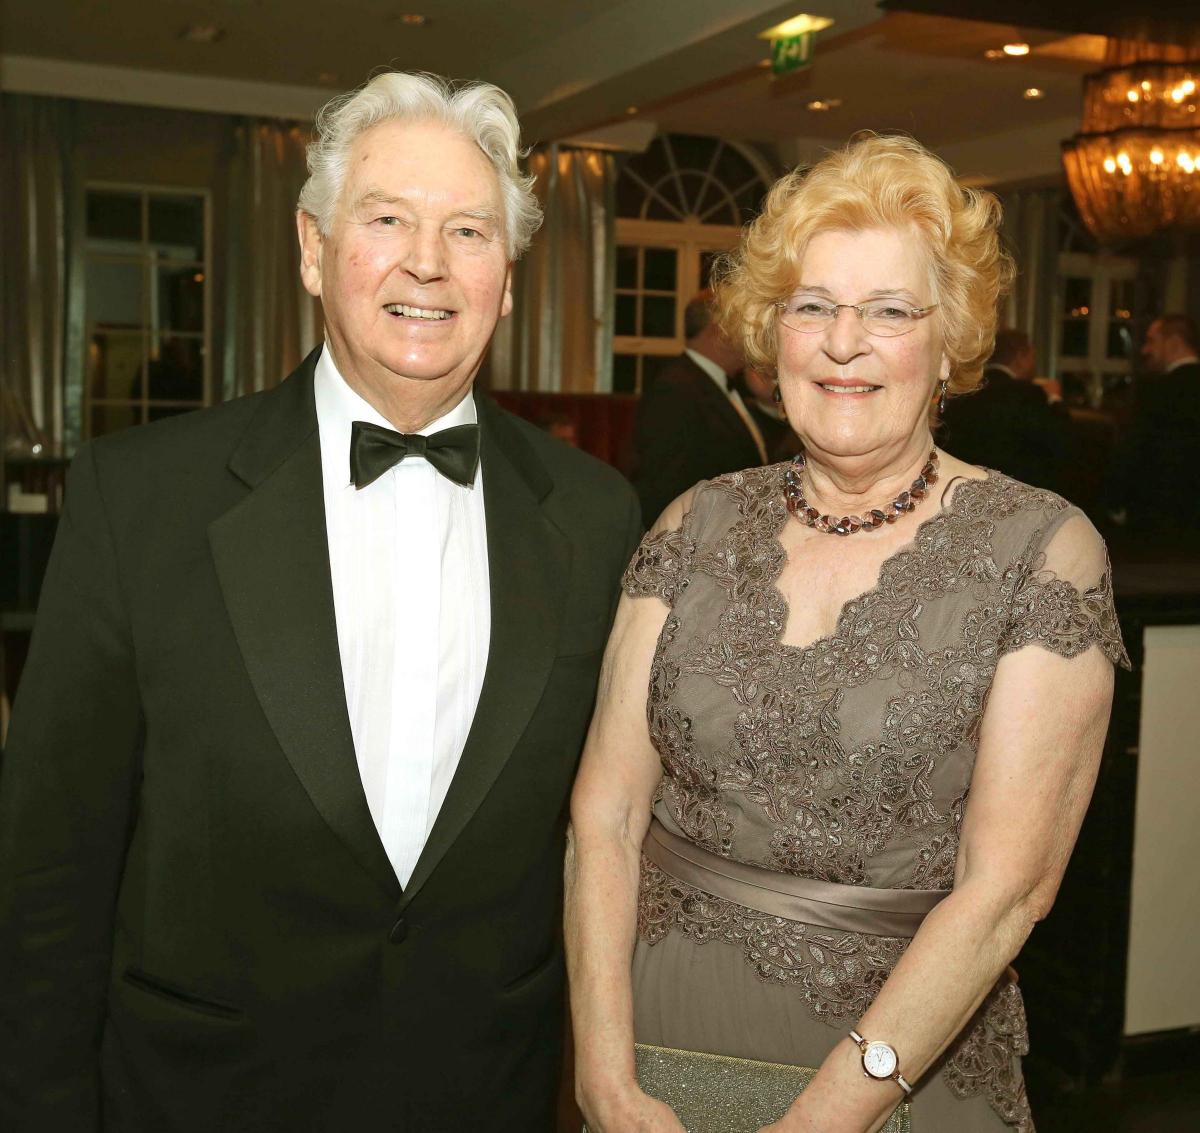 The Masonic Ladies Night at Scotch Corner Hotel.
Trevor and Celia Reast.
Picture: Richard Doughty Photography